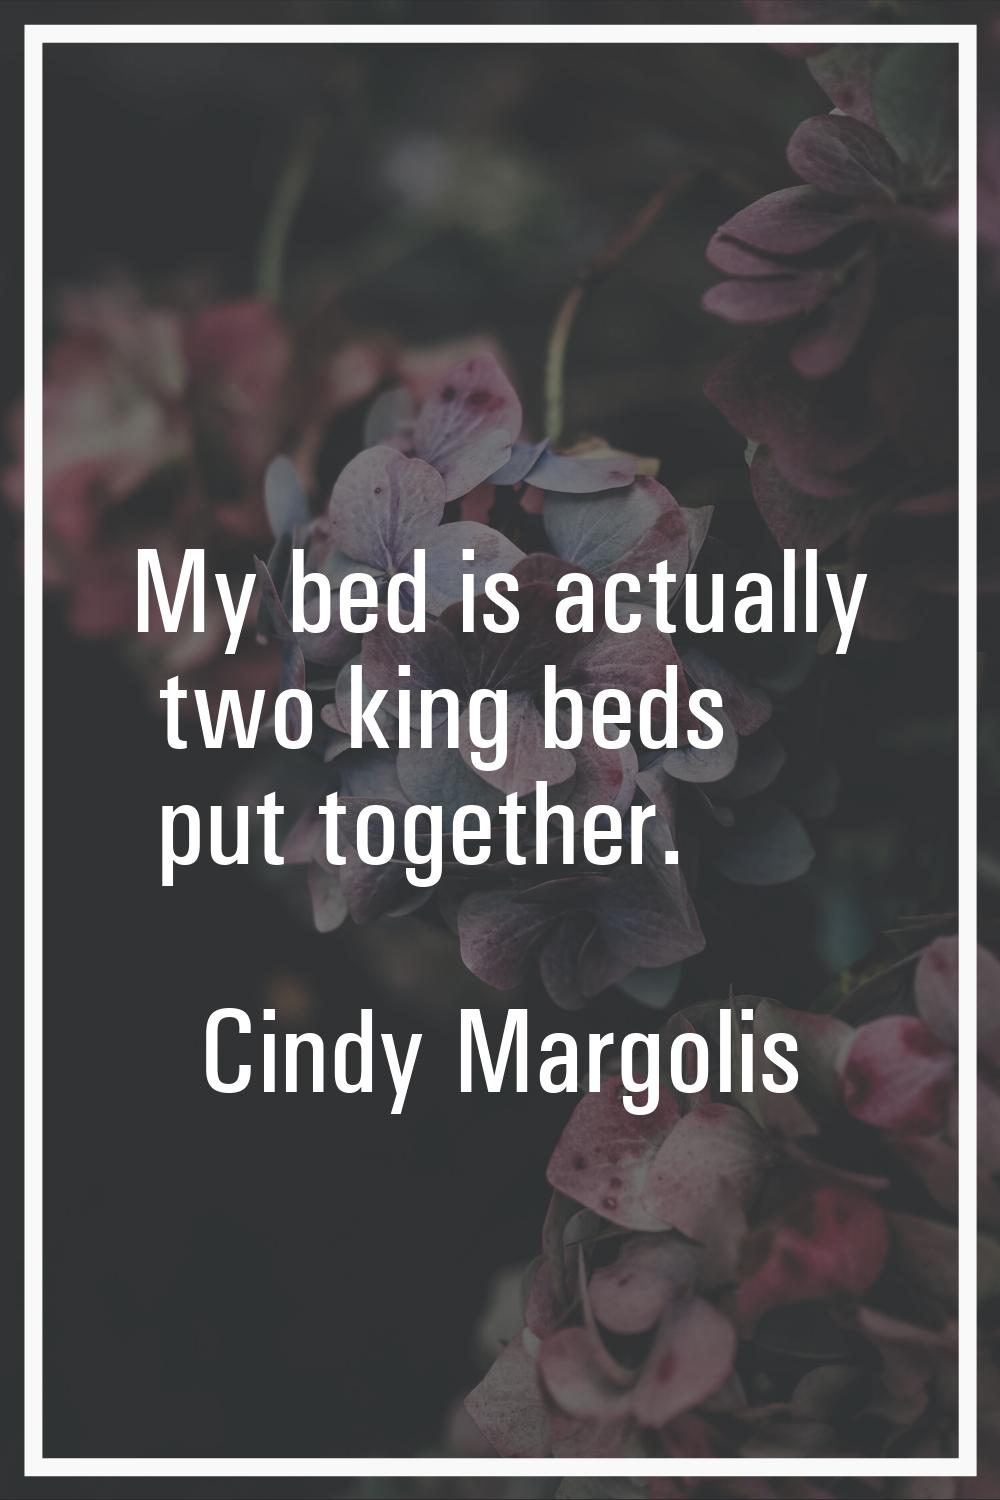 My bed is actually two king beds put together.